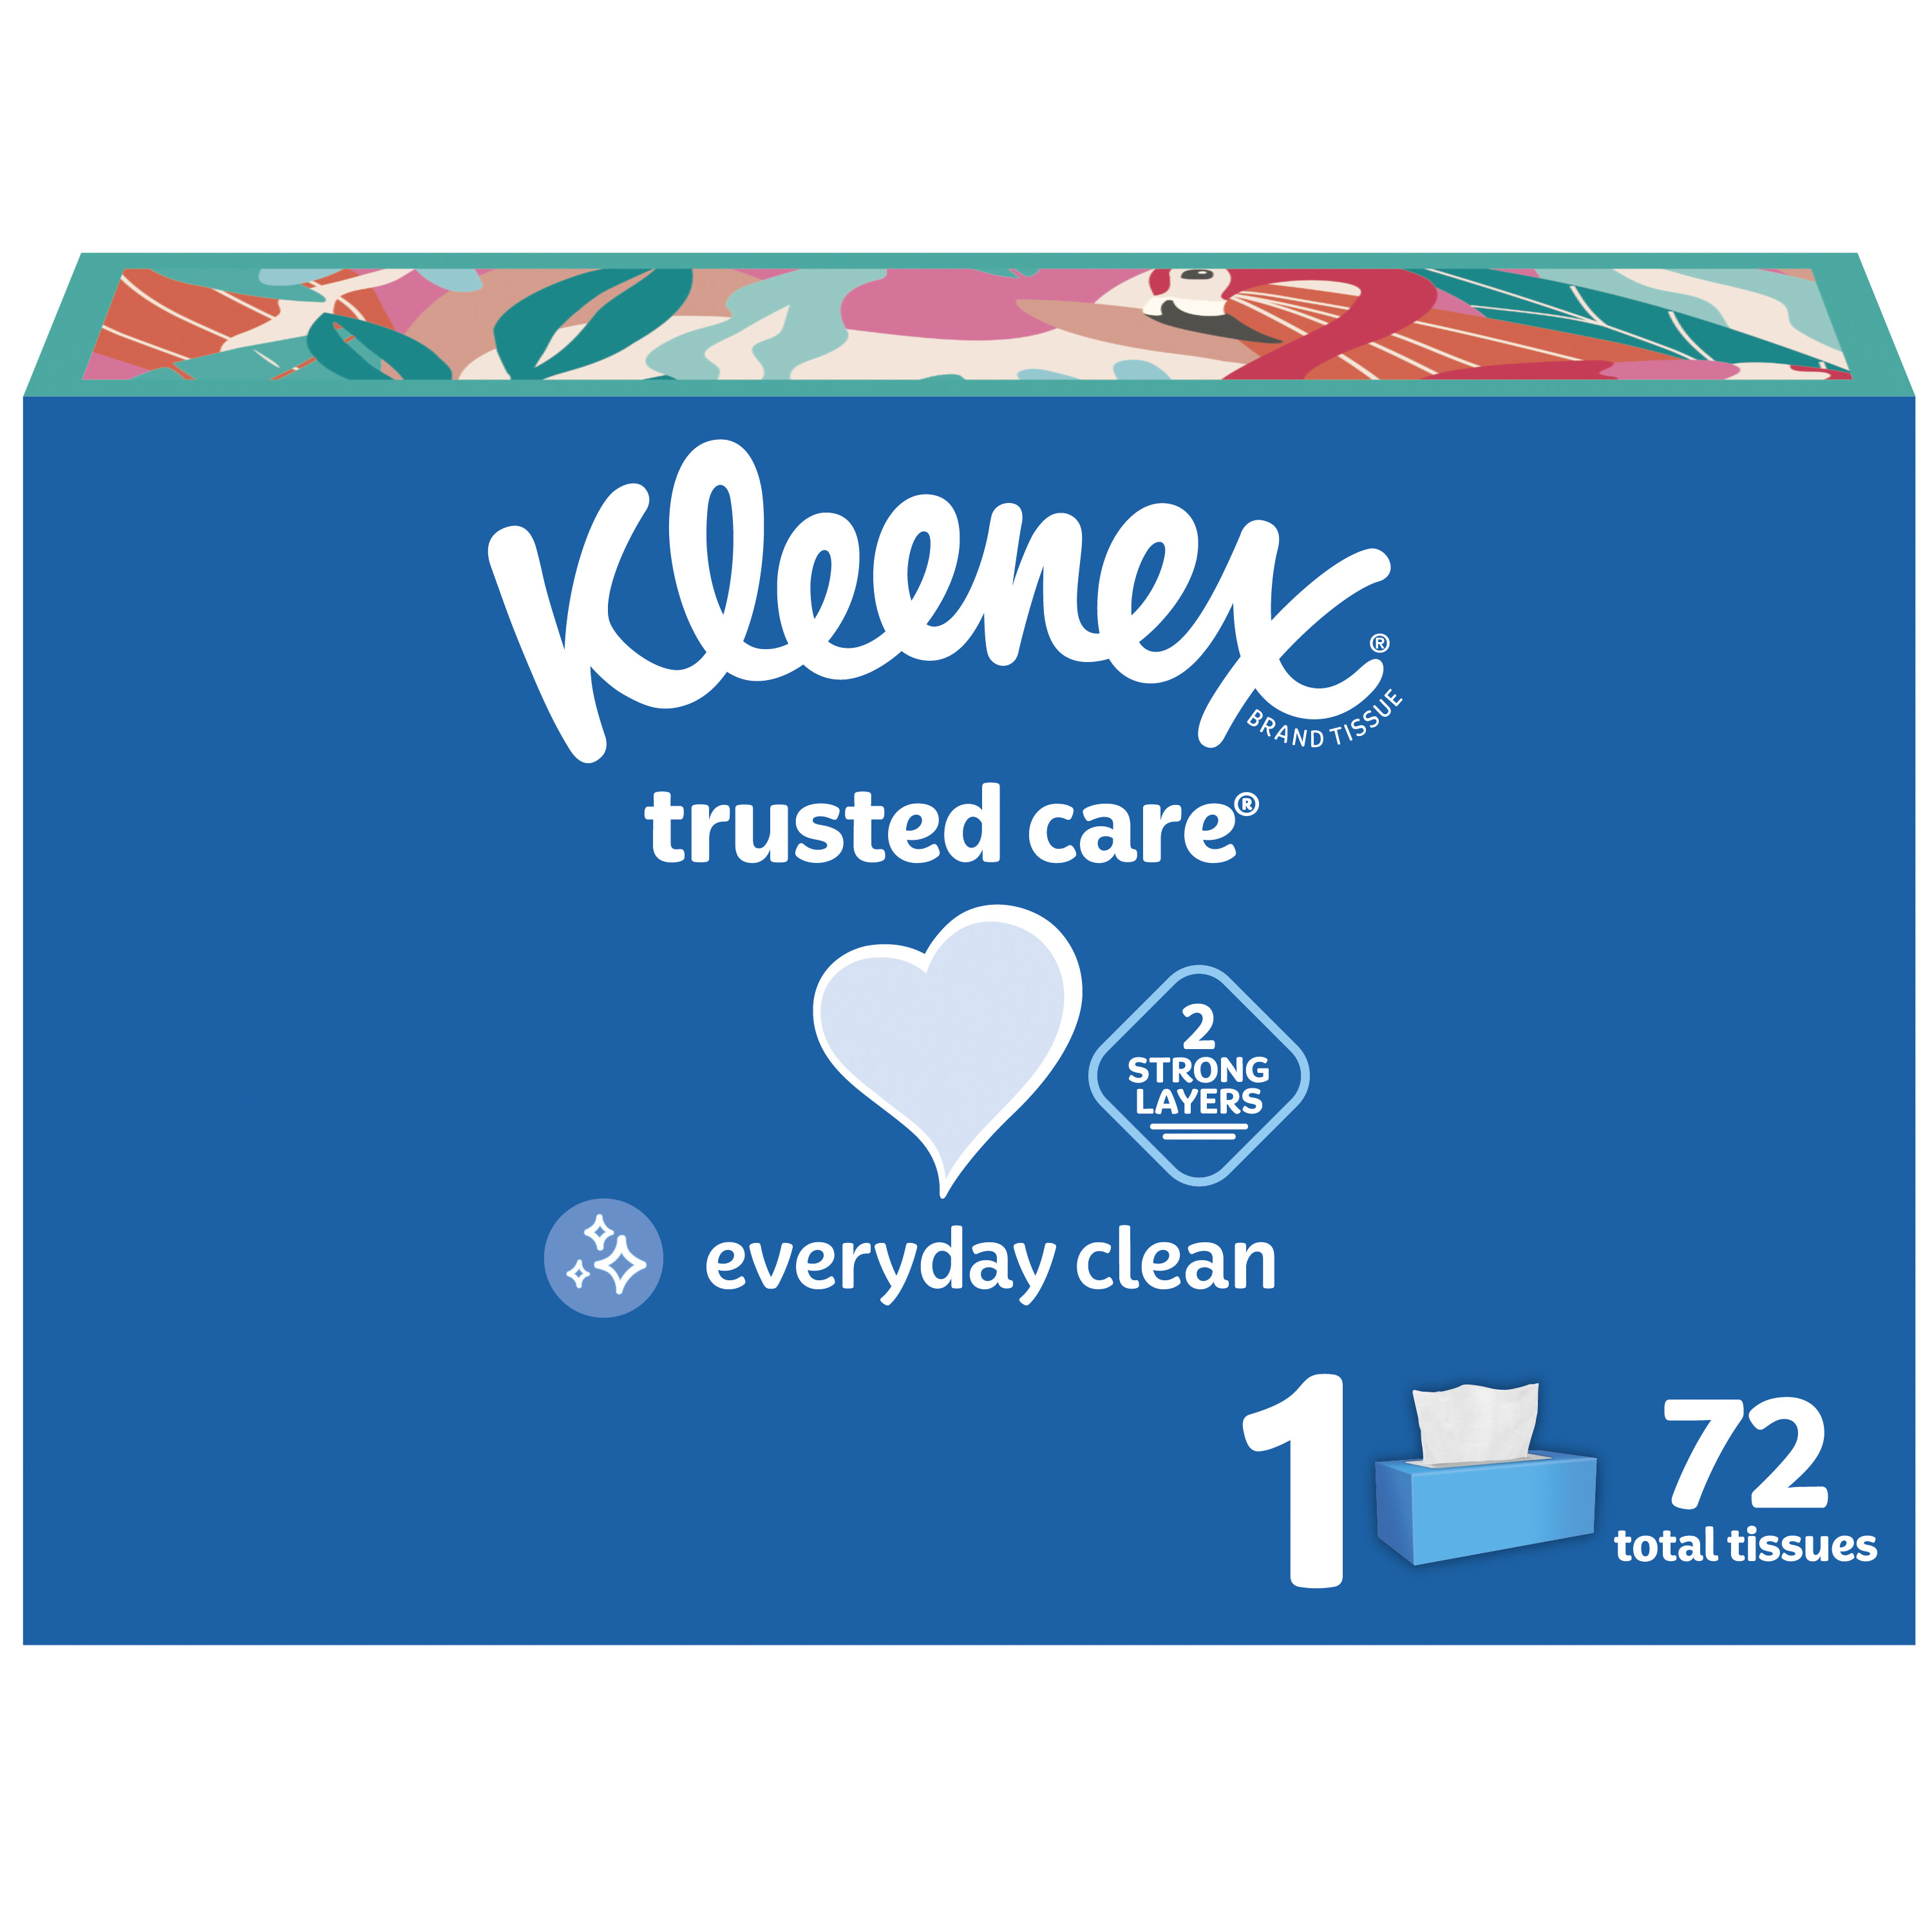 Kleenex Trusted Care Facial Tissues, 1 Flat Box - image 1 of 11